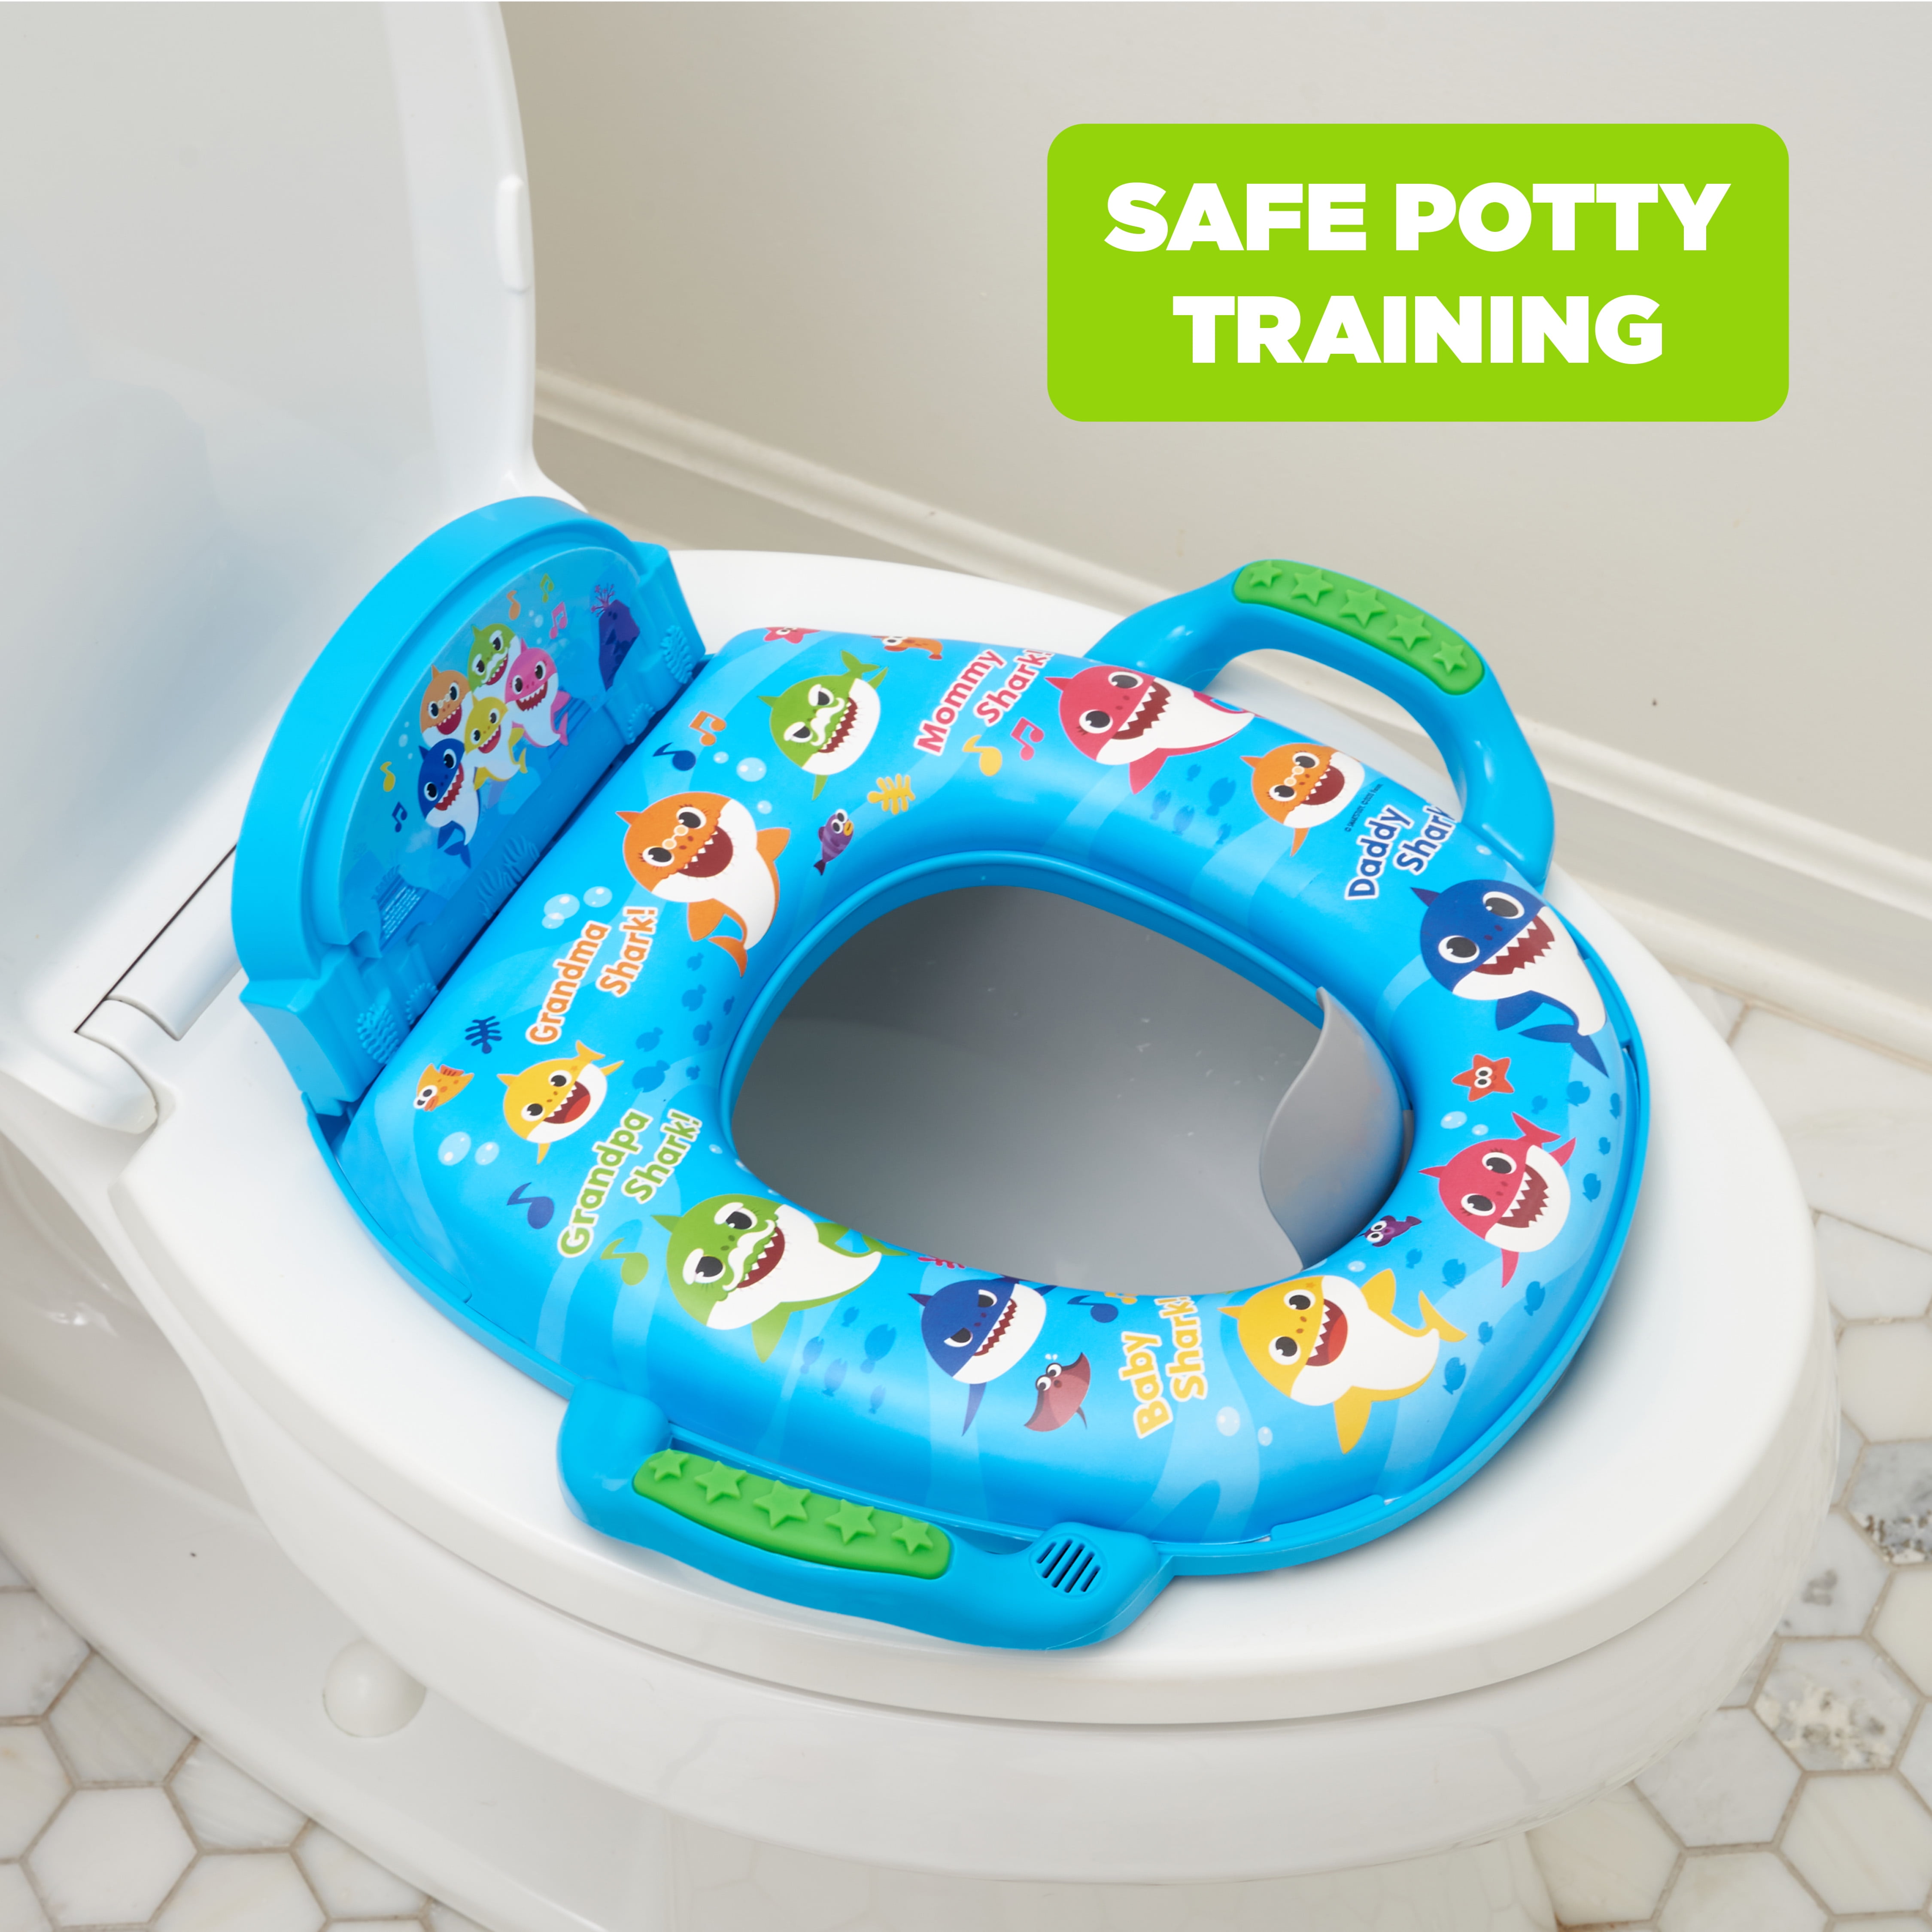 Potty Seat for Travel to Keep Your Baby Safe Blue Reusable Potty Seat Covers for Baby Blue Folding Potty Training Seat 